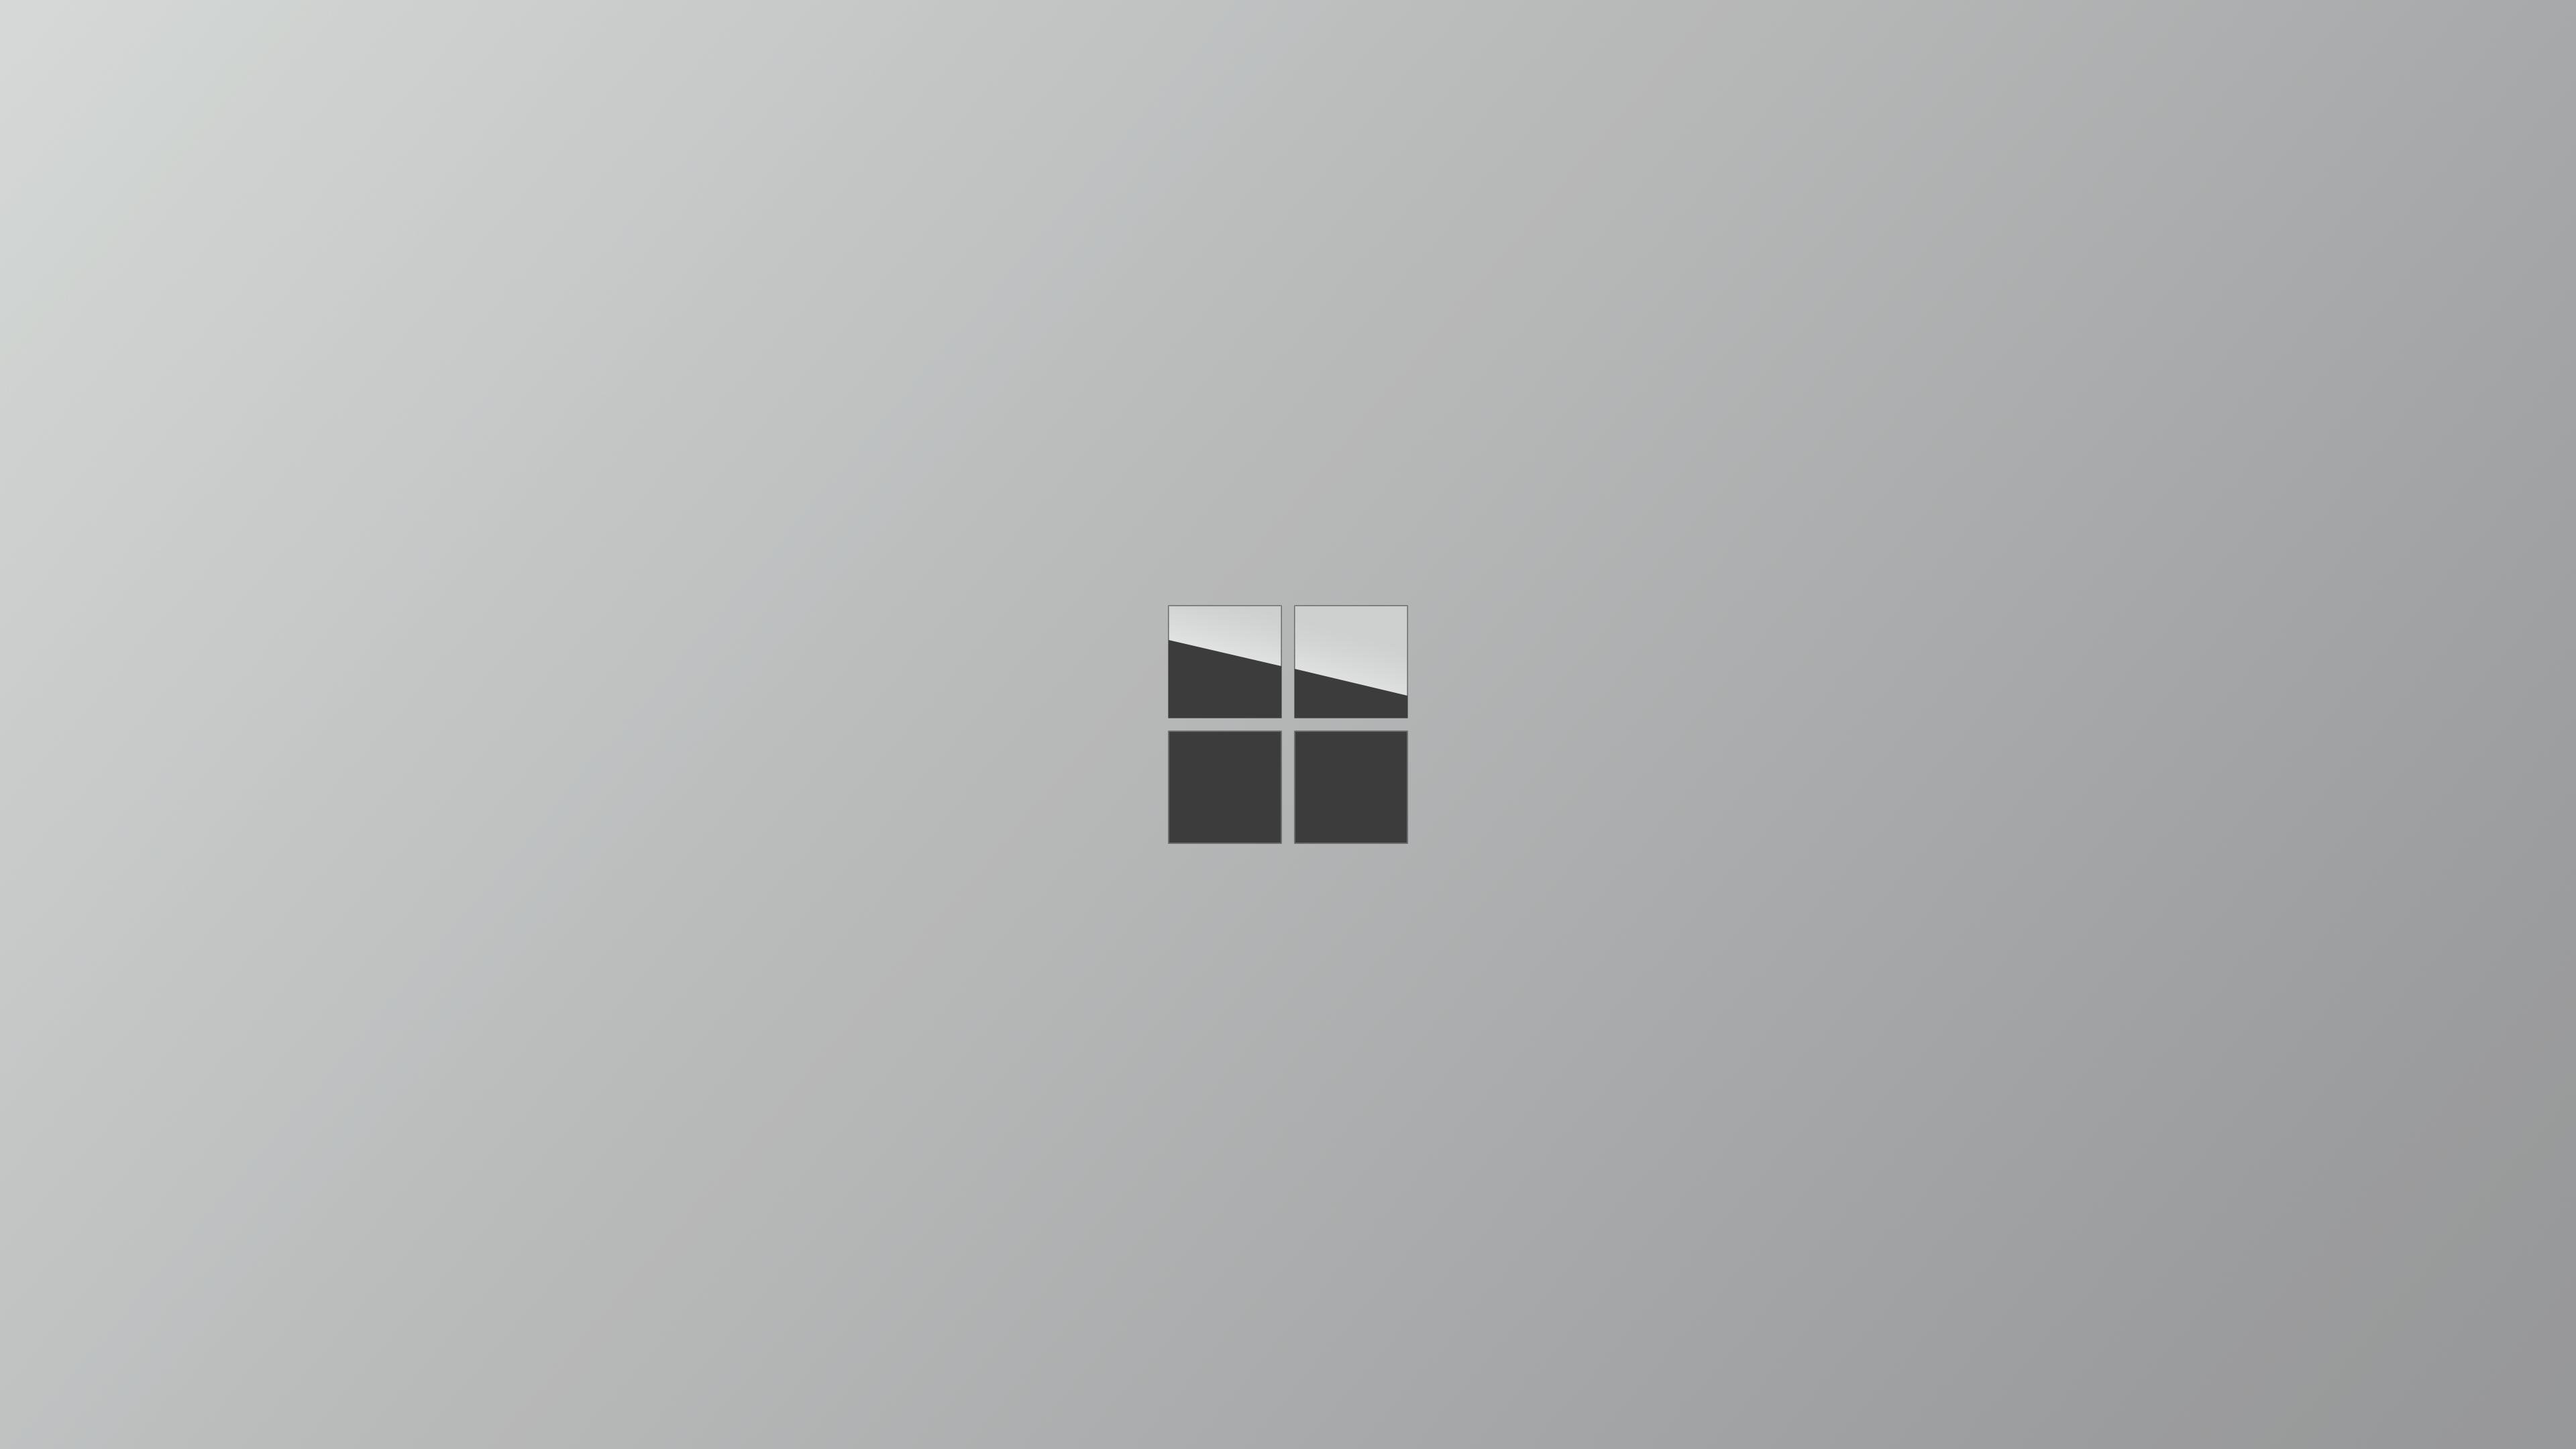 surface book wallpaper,white,wall,ceiling,logo,rectangle